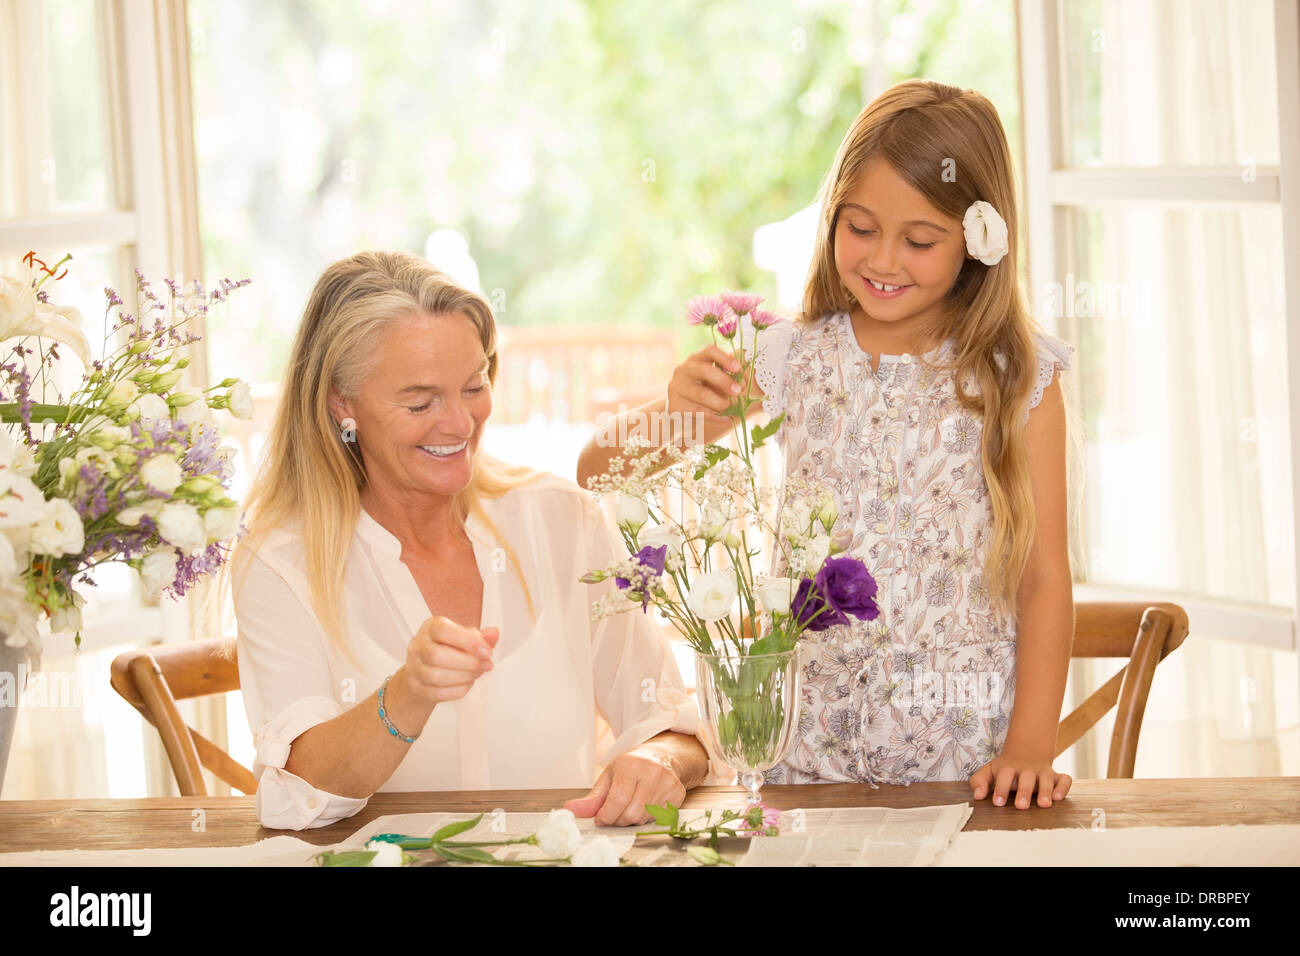 Grandmother and granddaughter arranging flowers Stock Photo